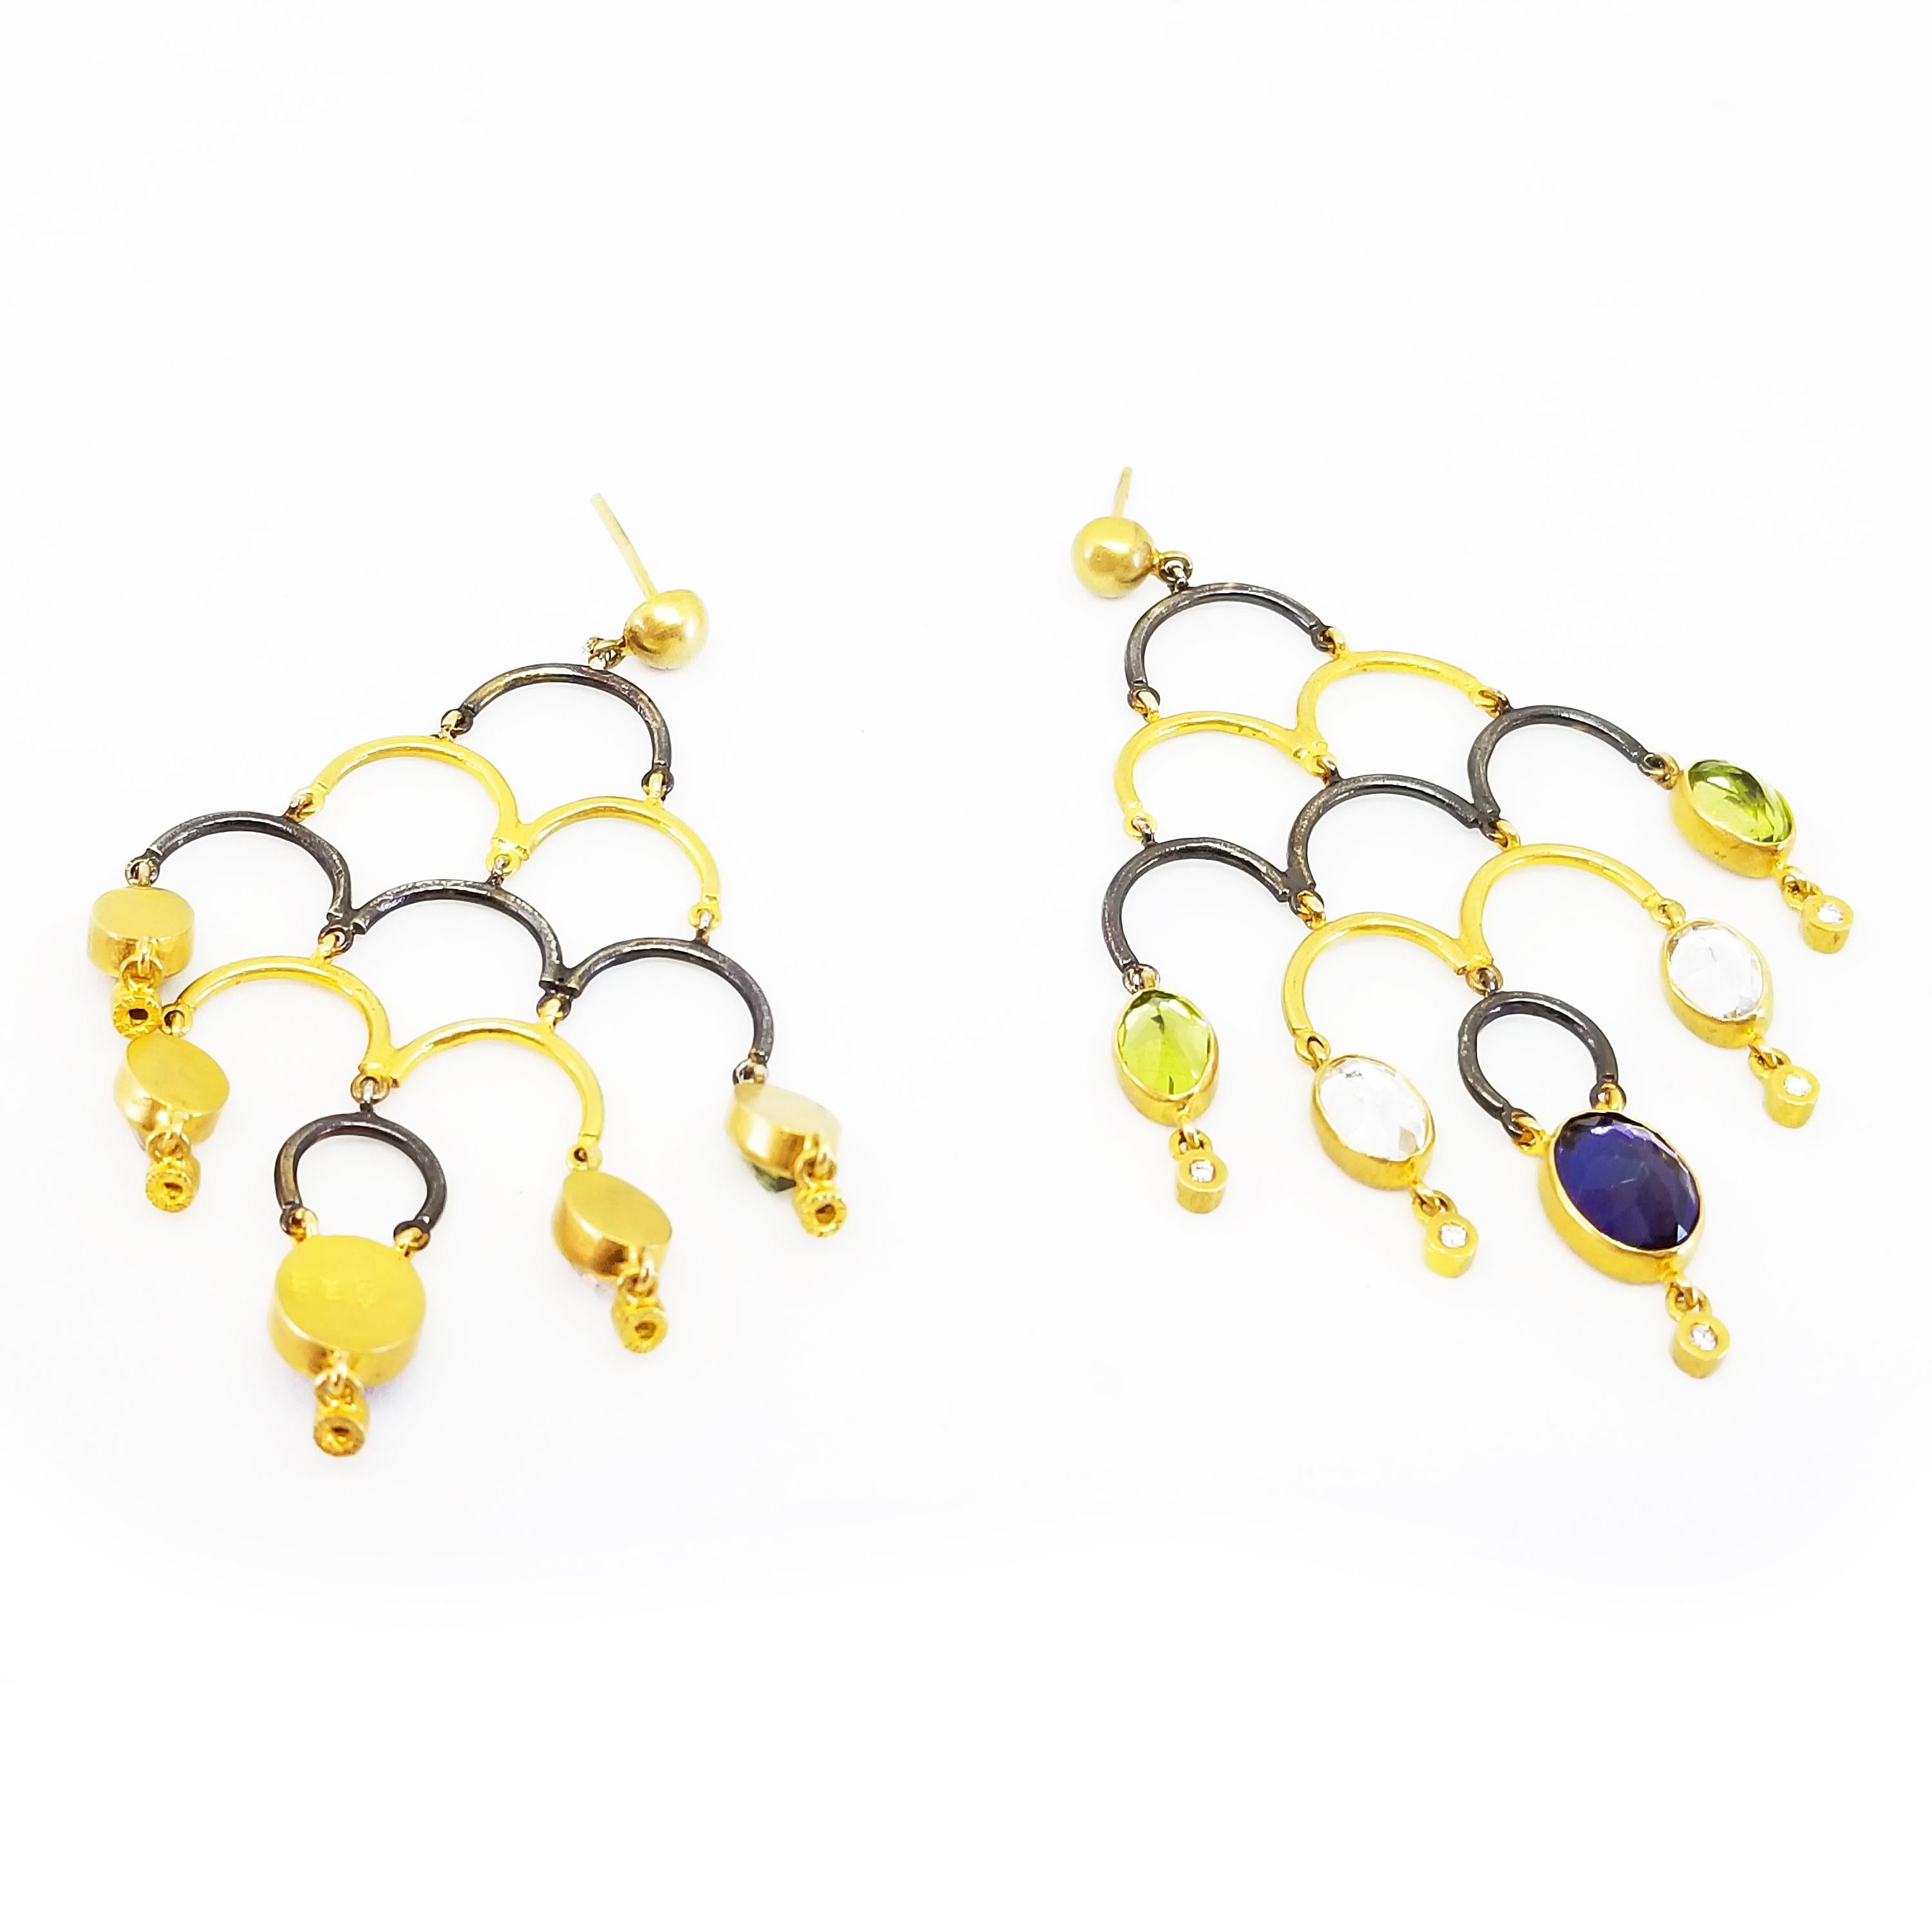 One pair of entirely Hand Crafted Earrings made in Turkey by the Husband and Wife Team at Kurtulan, Naci and Meltem. The Chandelier drop Earrings  feature Oval,  Rose Cut,  Color Gemstones and Round Diamonds. The multi color Gems dangle in